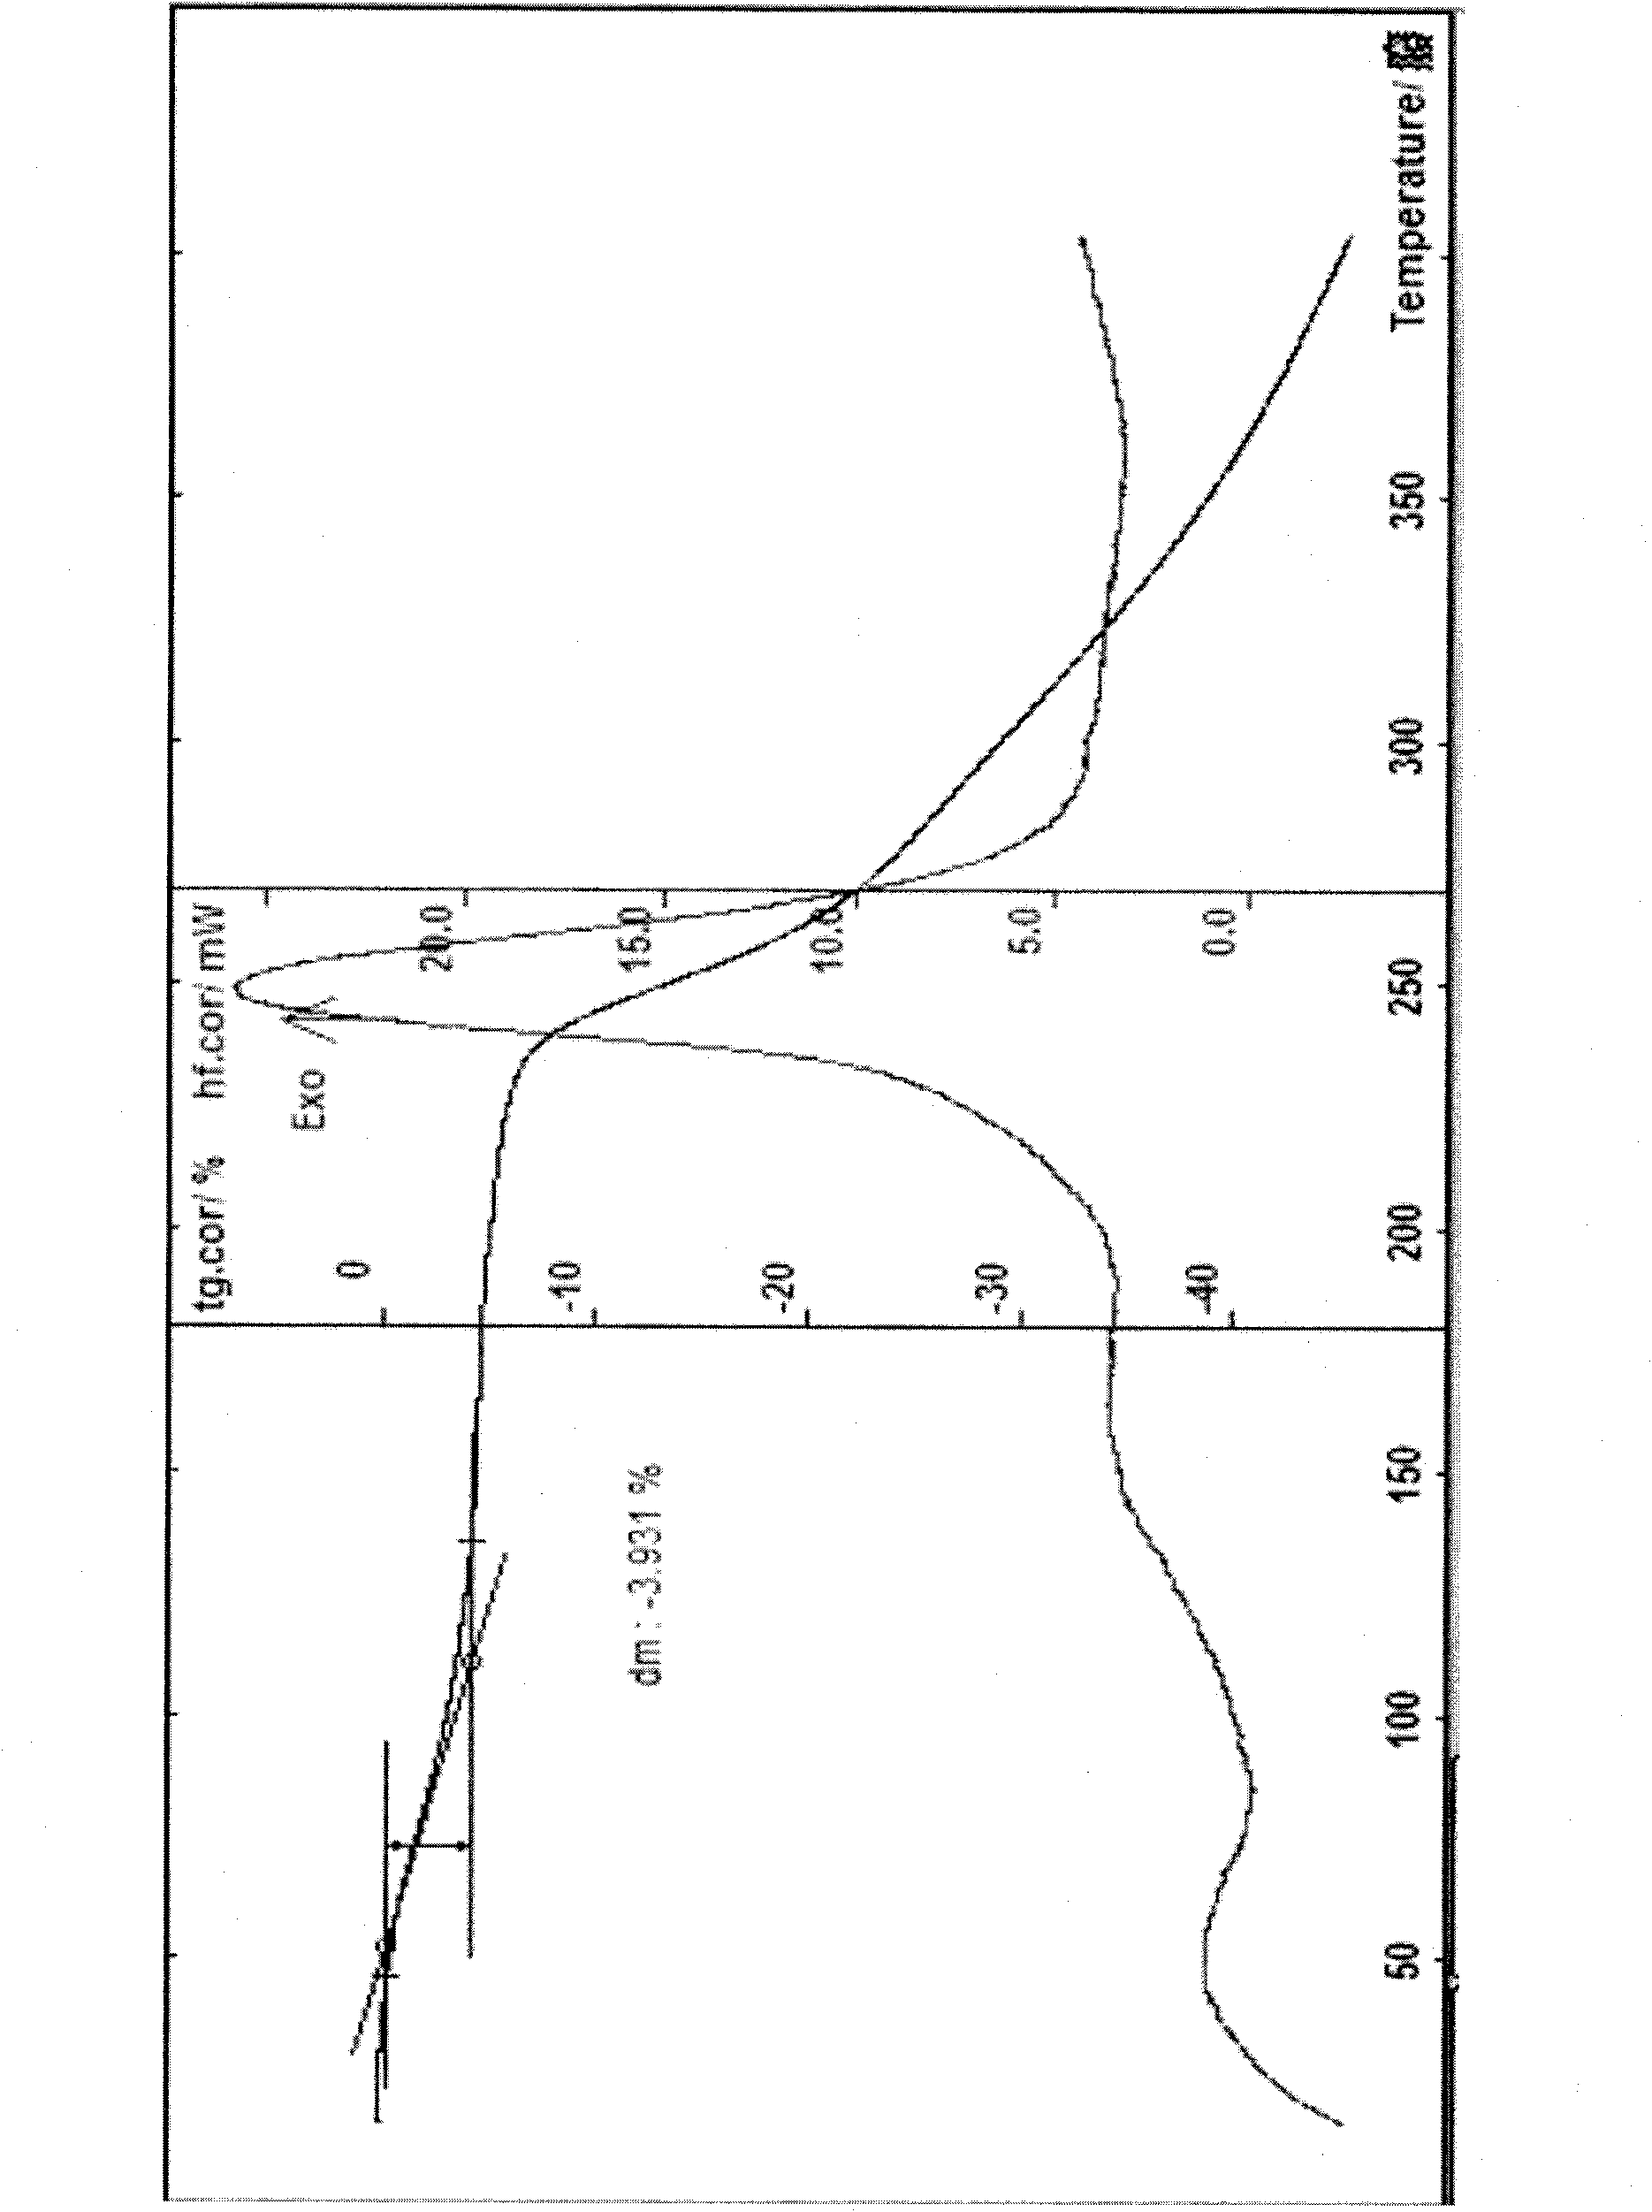 Cefodizime sodium hydrate, preparation method thereof and application thereof